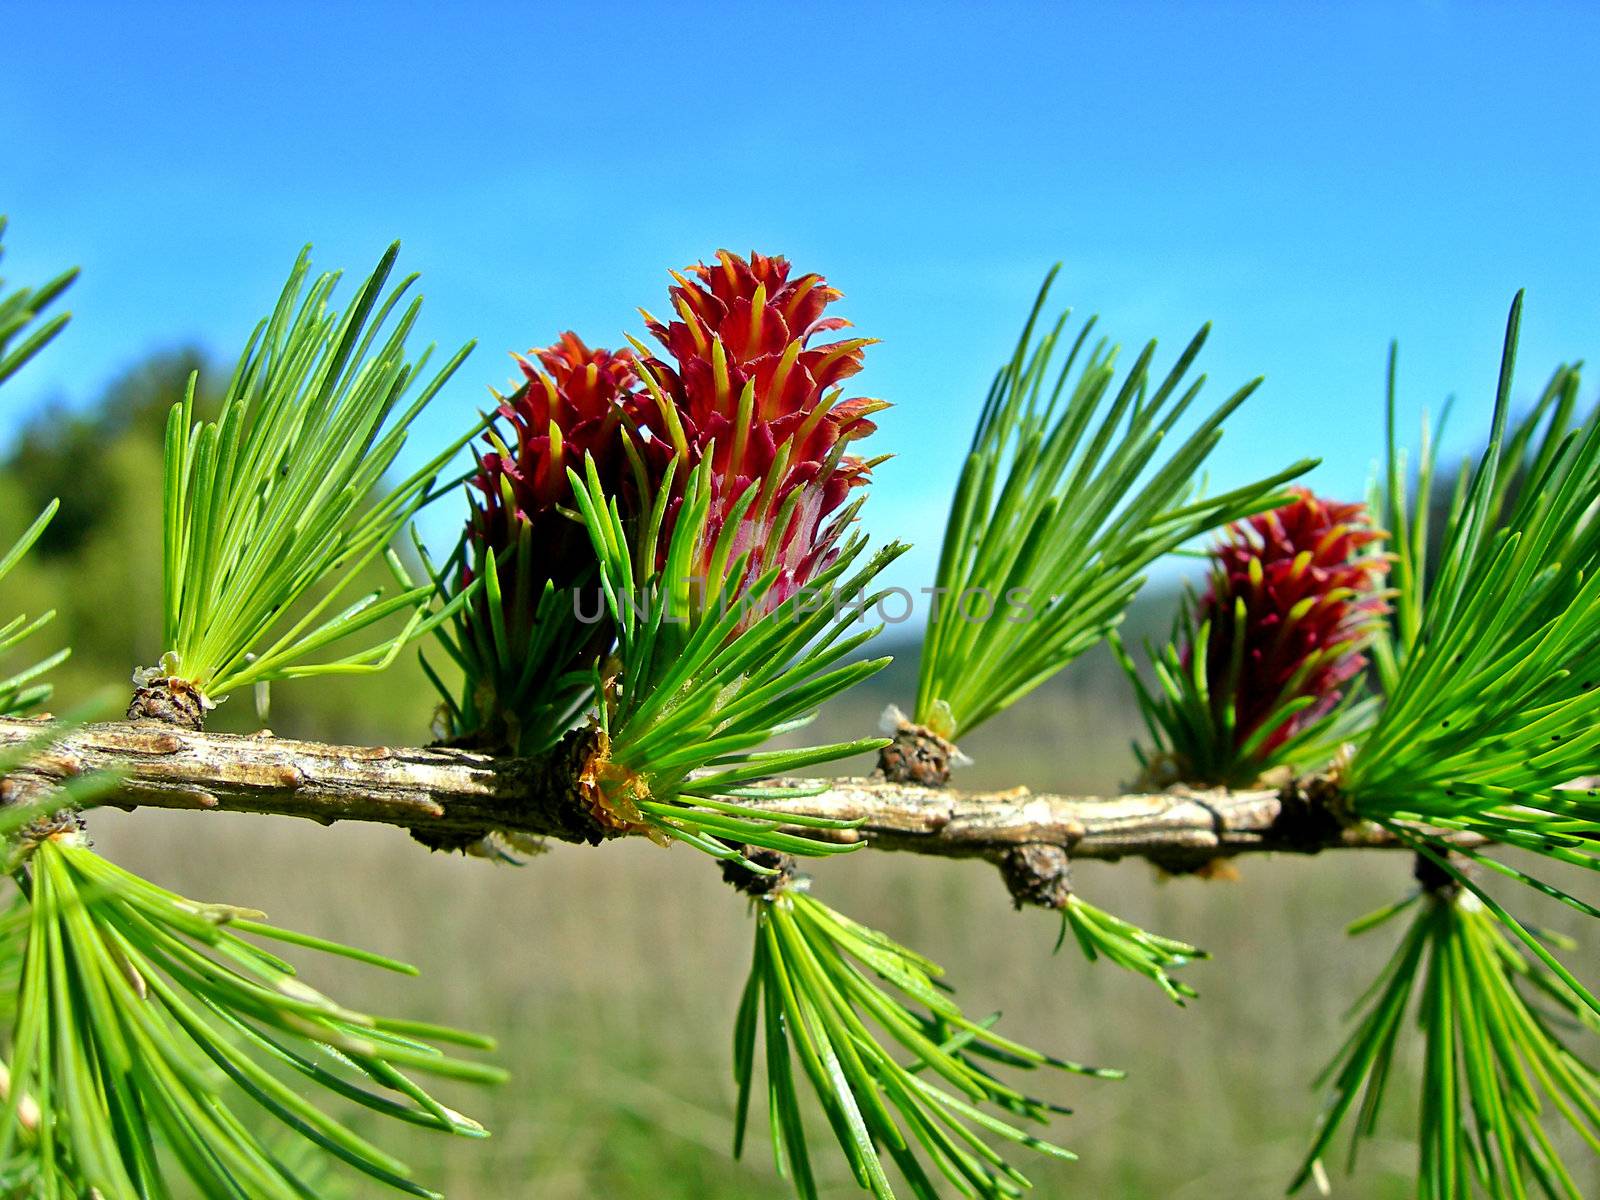           Detail of fresh red larch cones and needles          